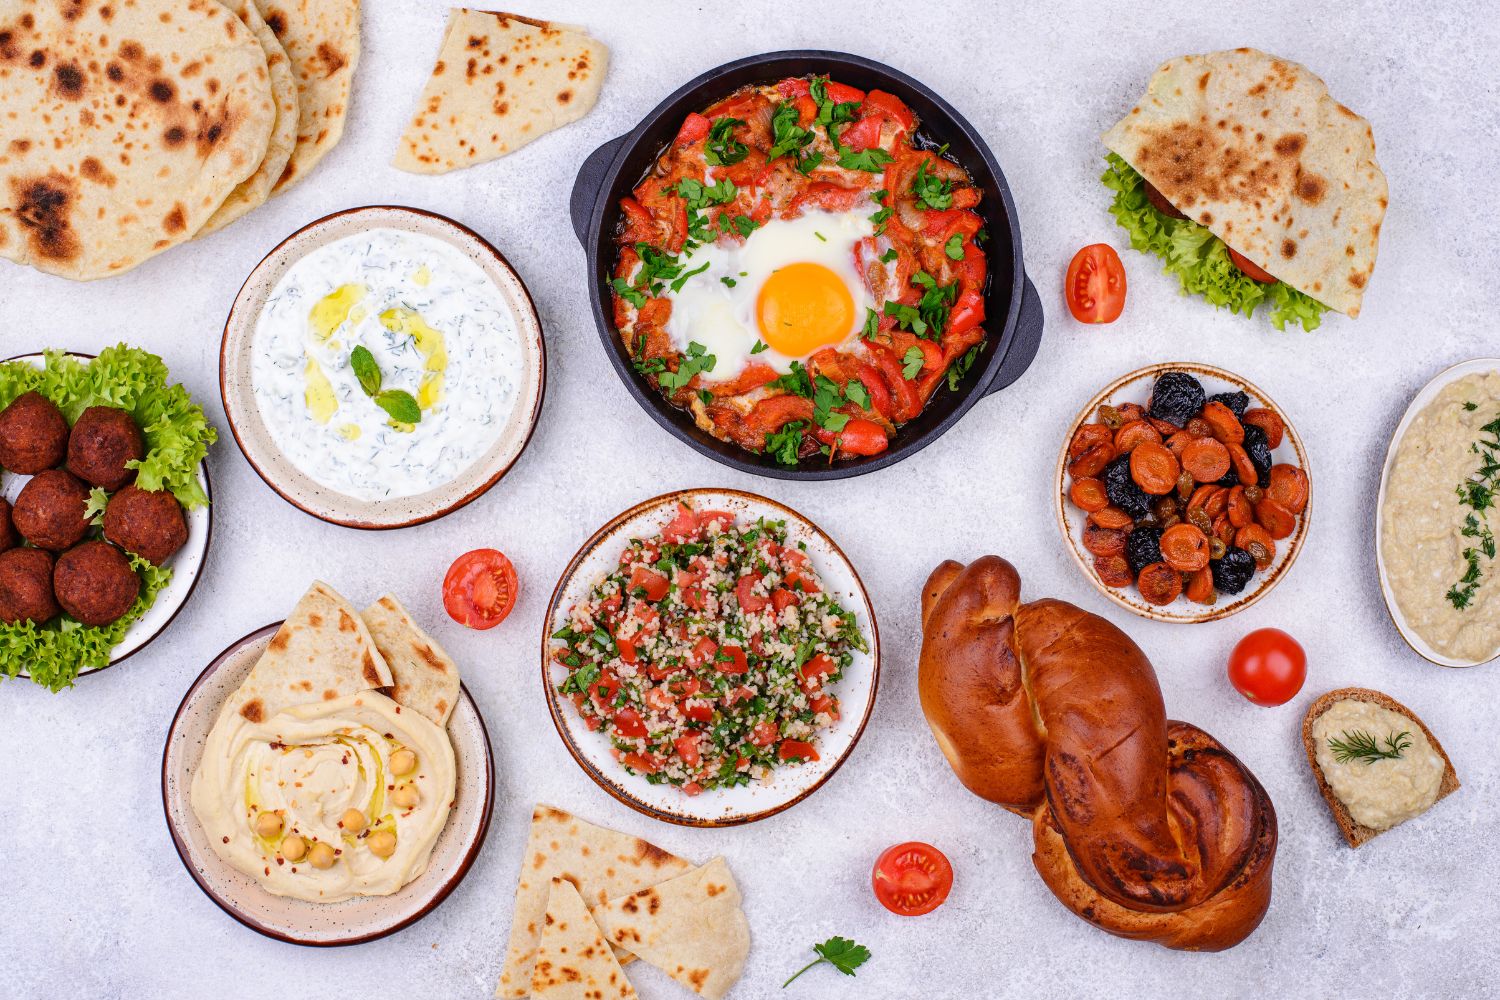 Lebanon Culture and Customs » All you need to know Food from Lebanon